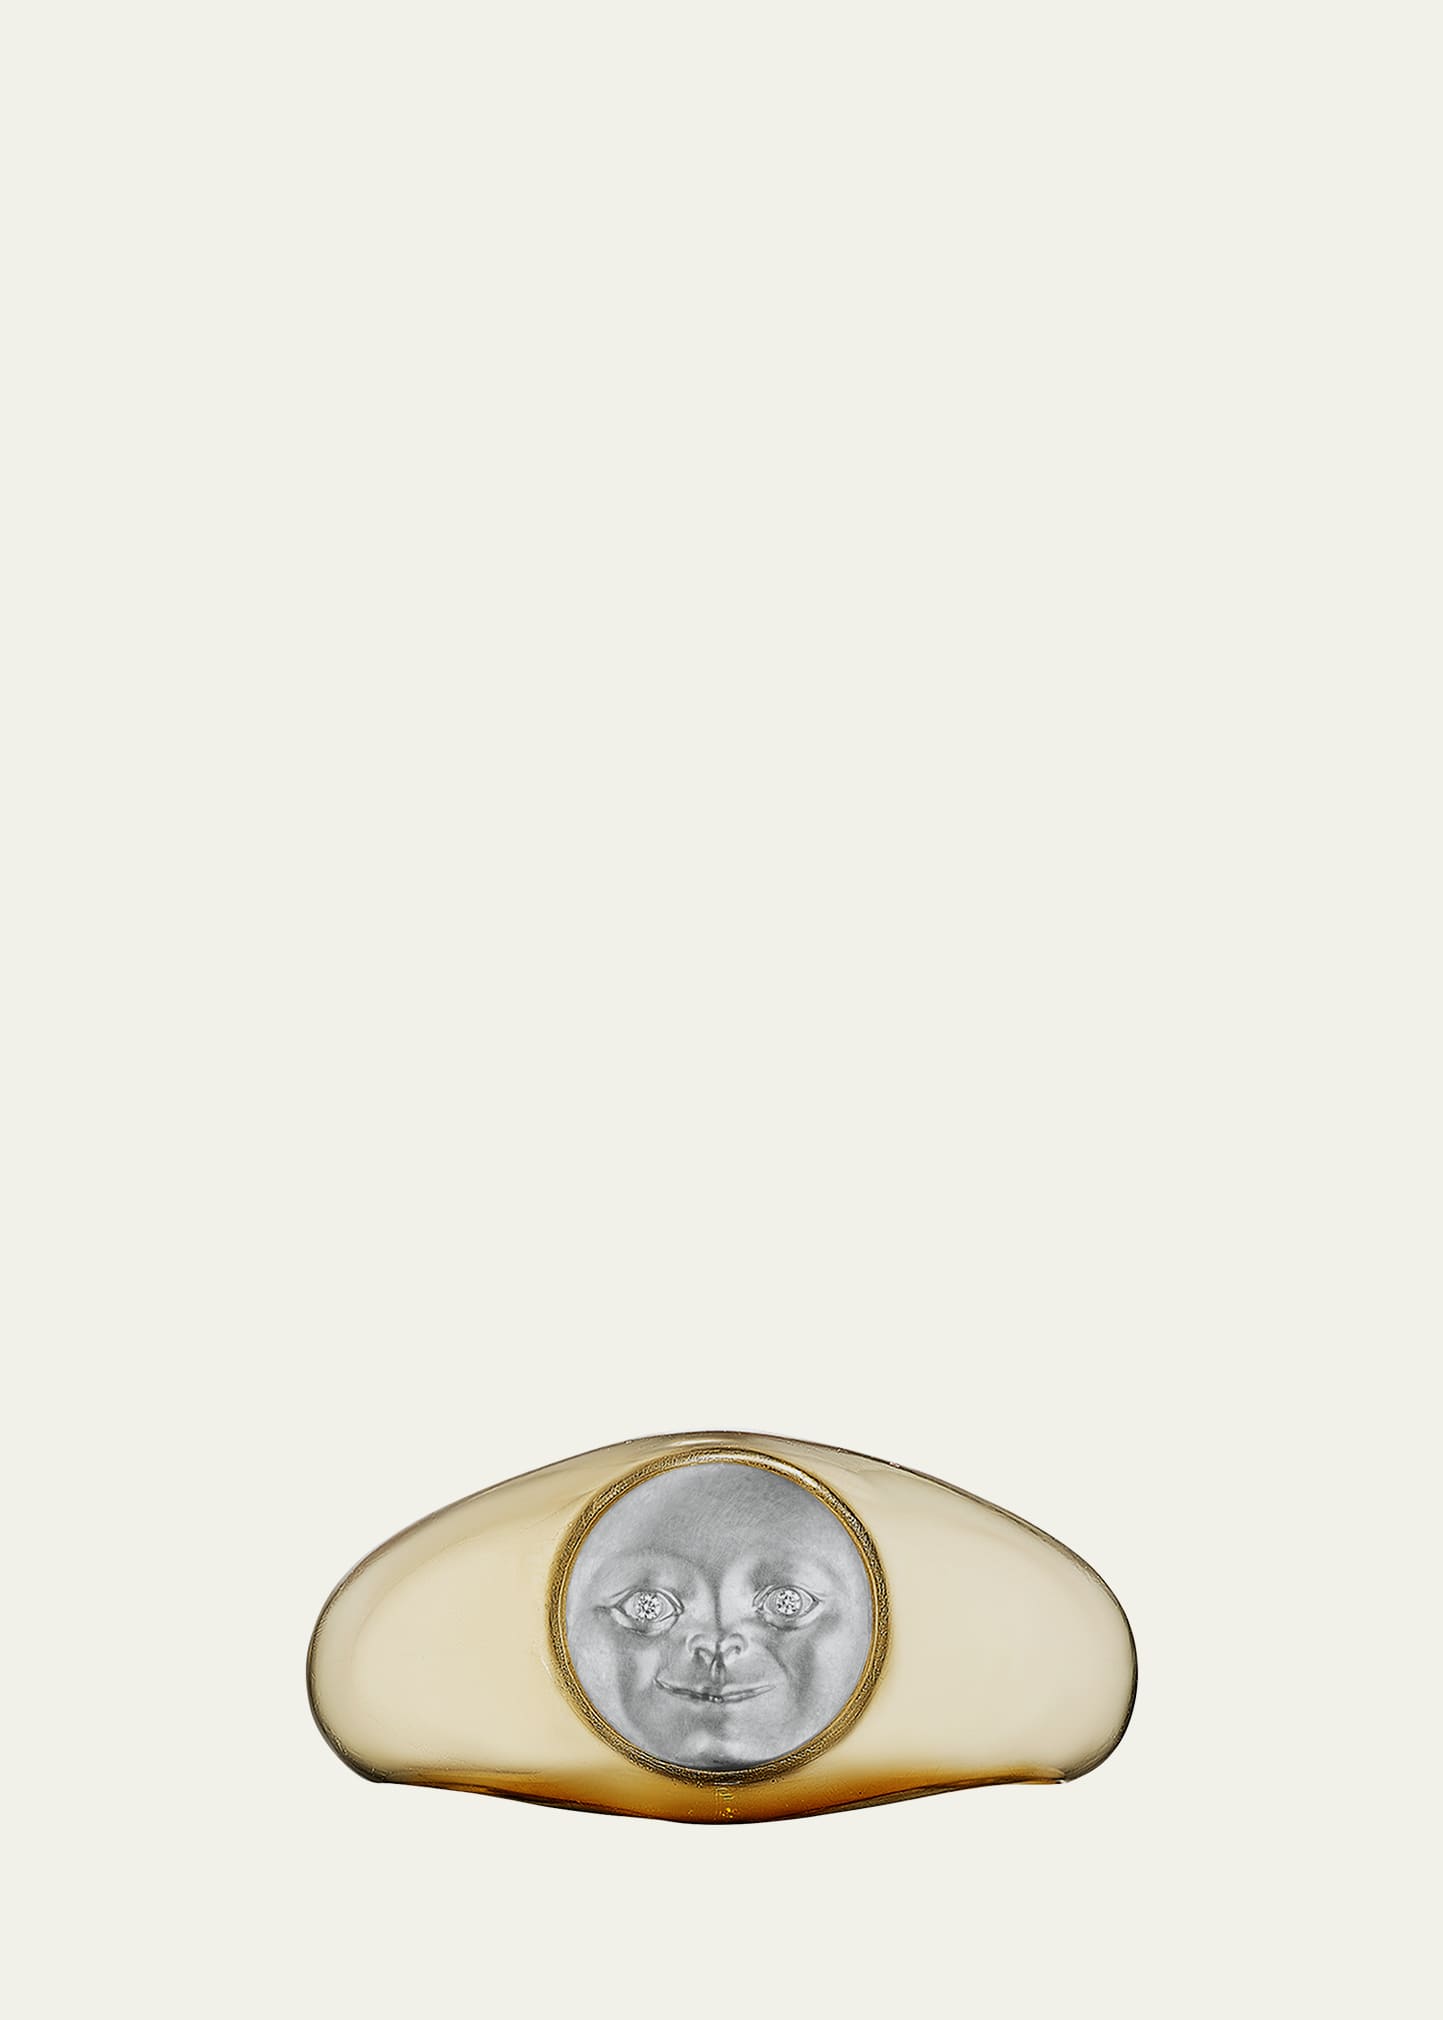 Anthony Lent Platinum and Gold Traveling Moon Face Ring with Diamonds